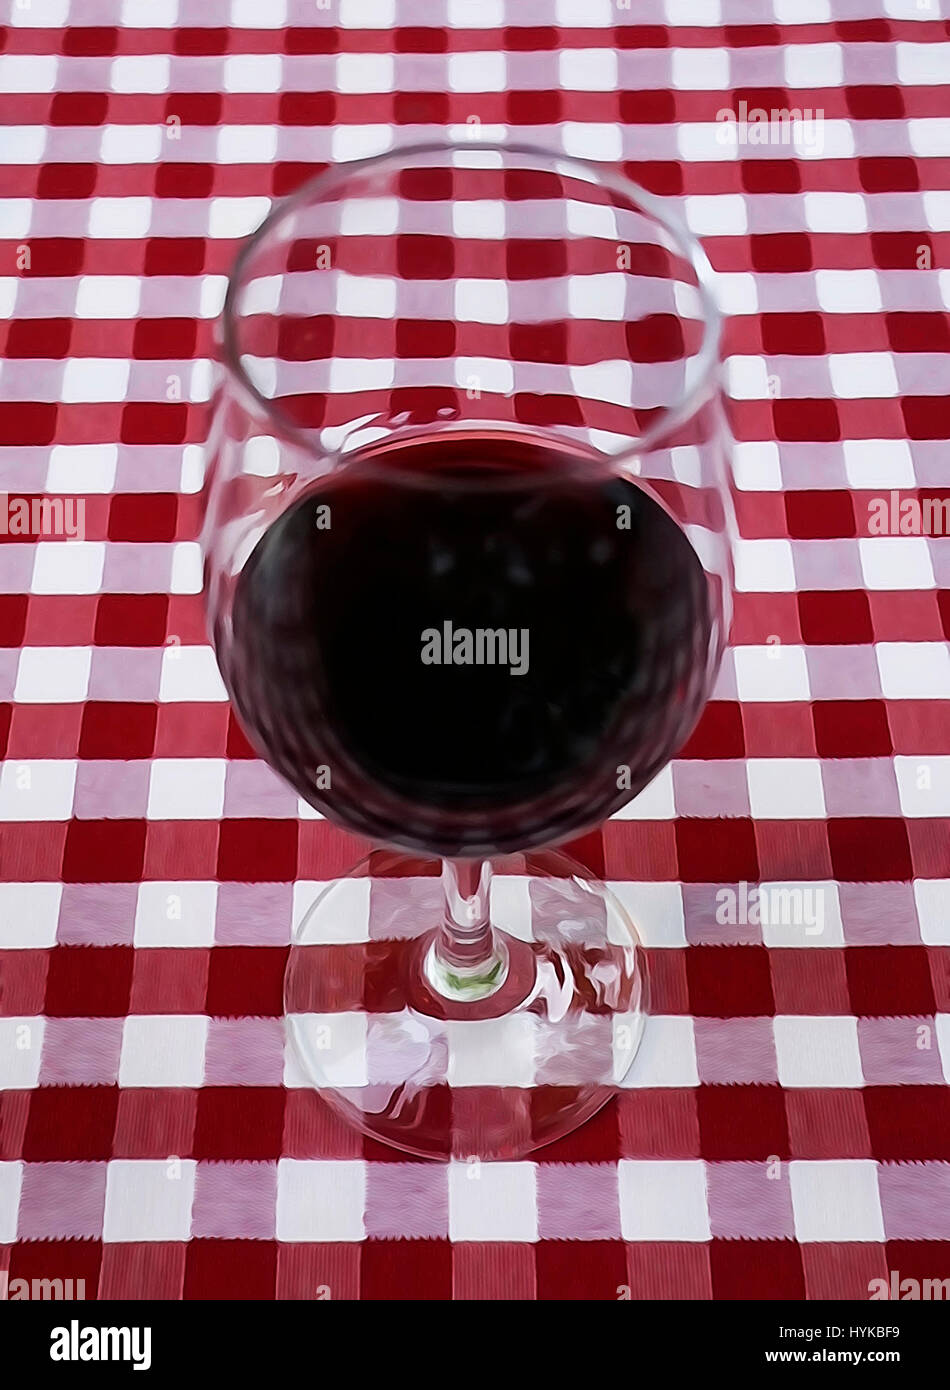 Red wine in glass on red table cloth. Stock Photo